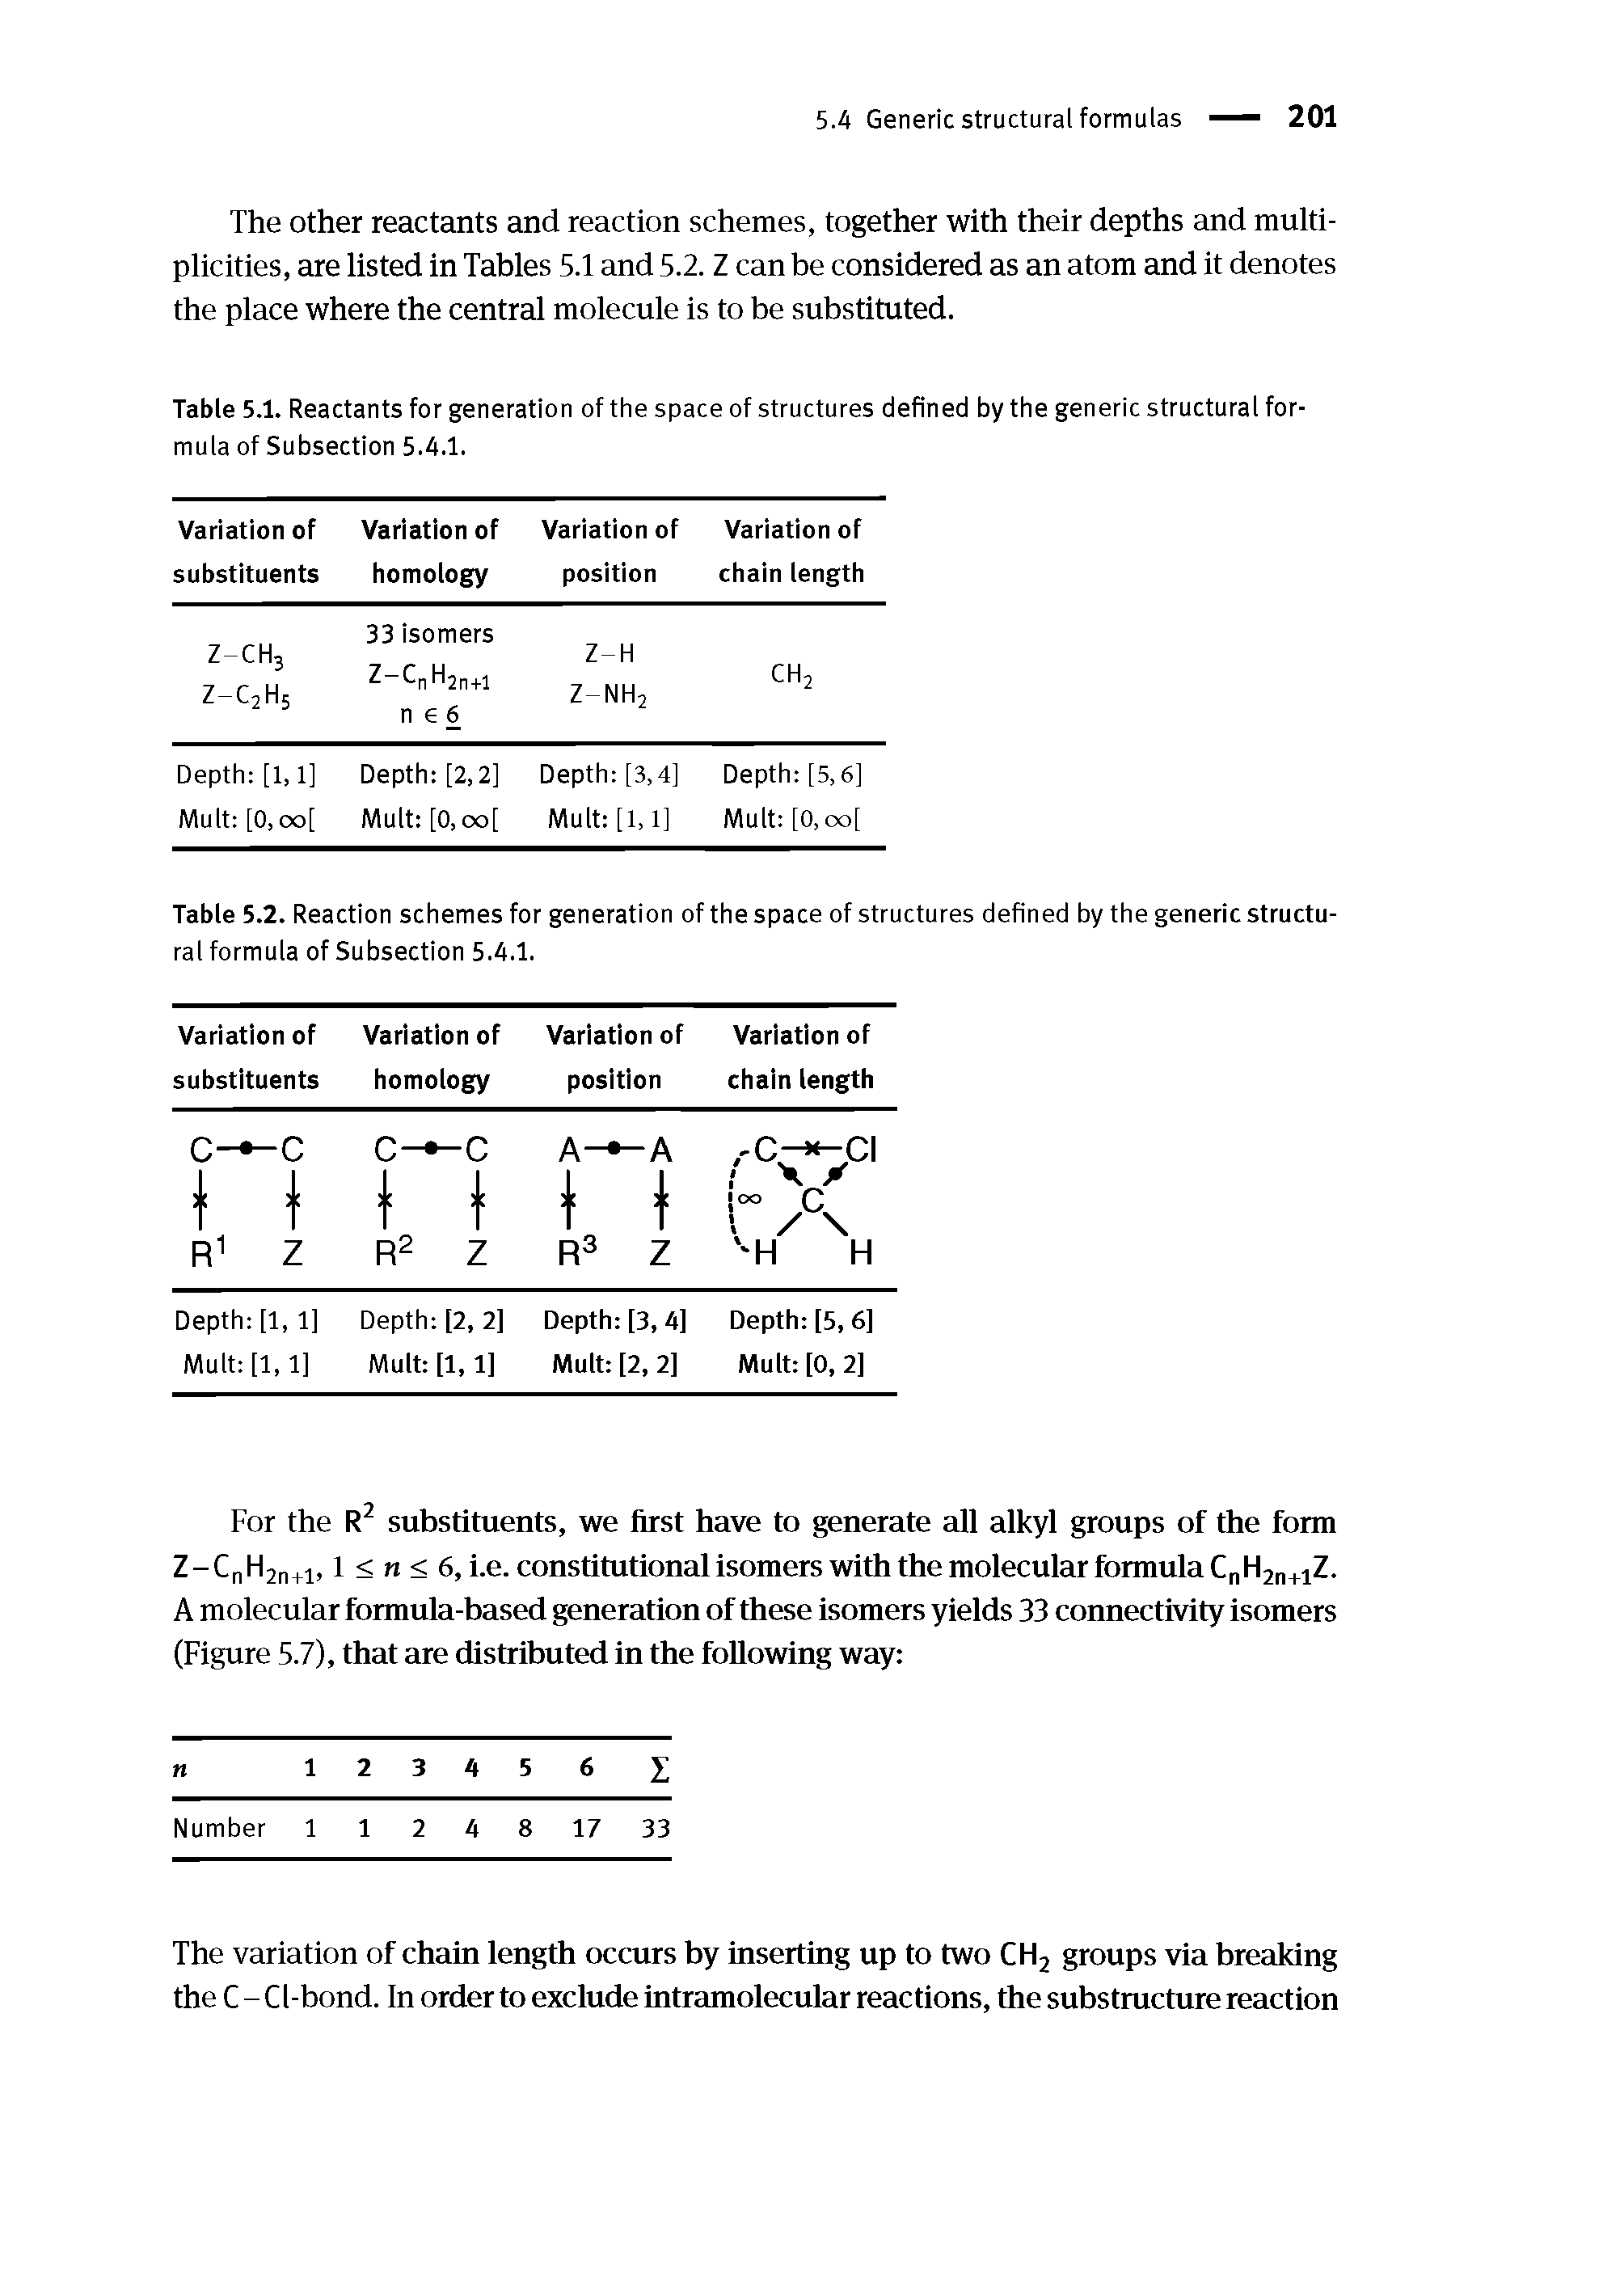 Table 5.1. Reactants for generation of the space of structures defined by the generic structural formula of Subsection 5.4.1.